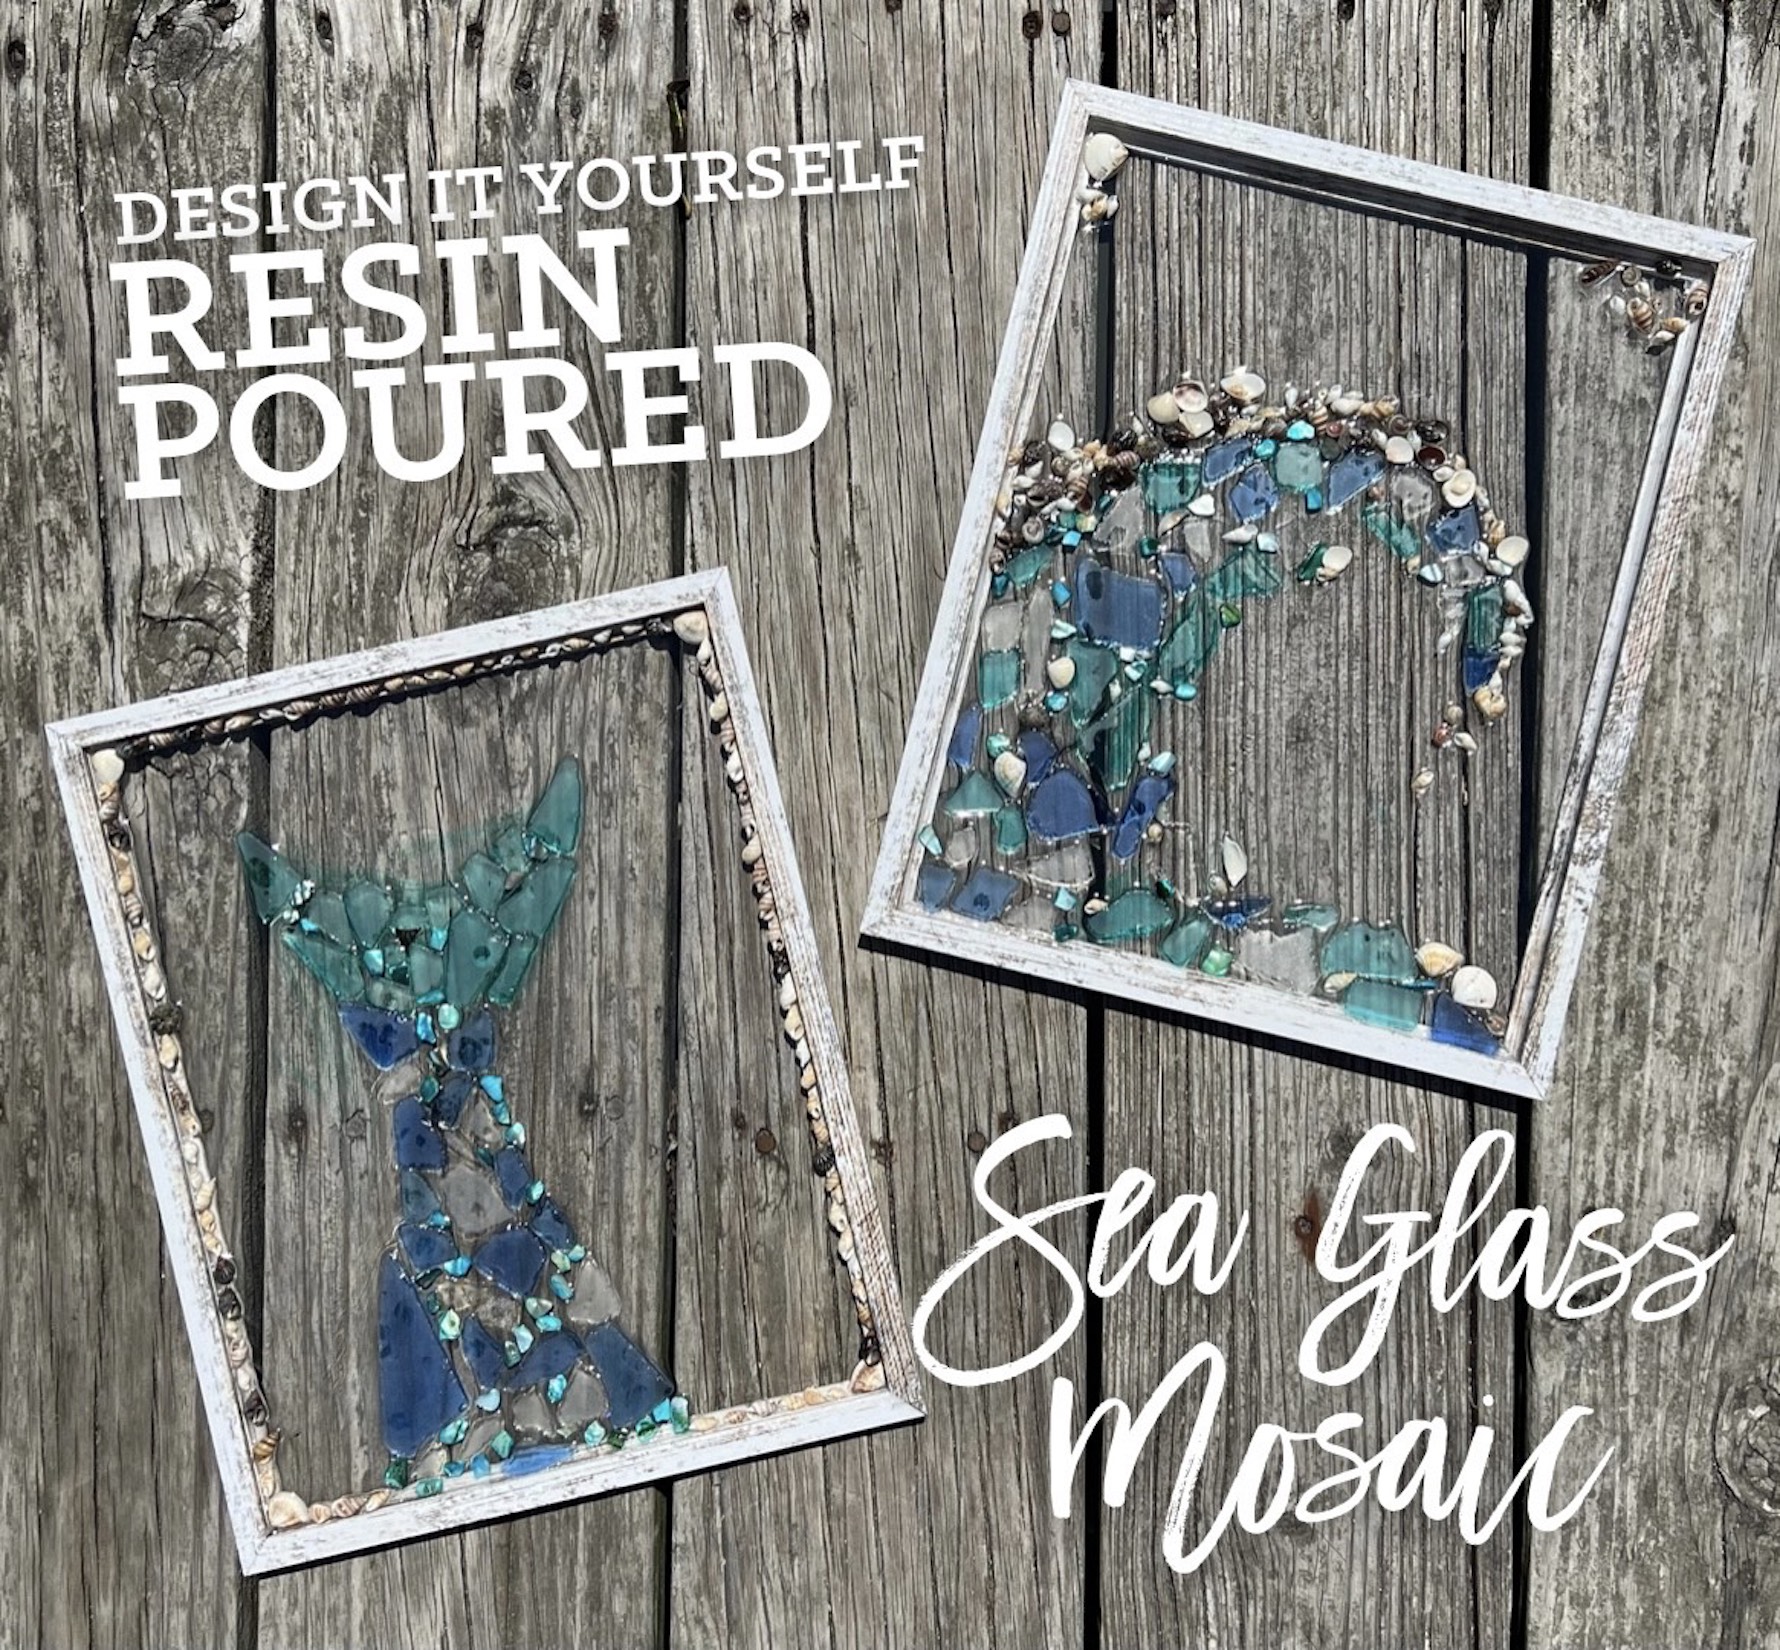 SOLD OUT! Resin Poured Sea Glass Mosaic